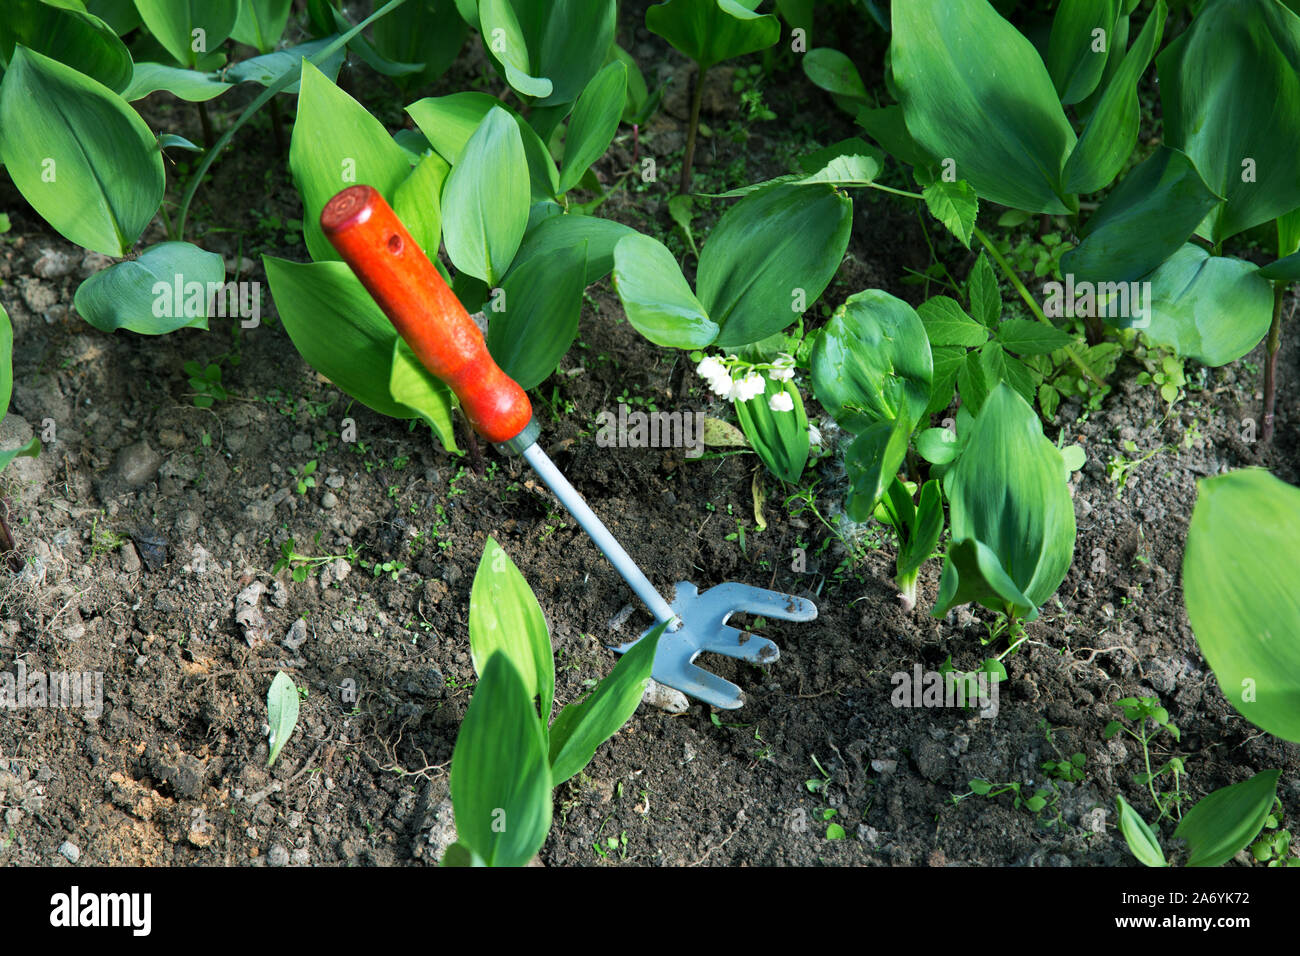 little hoe in the ground in a bed of flowers Stock Photo